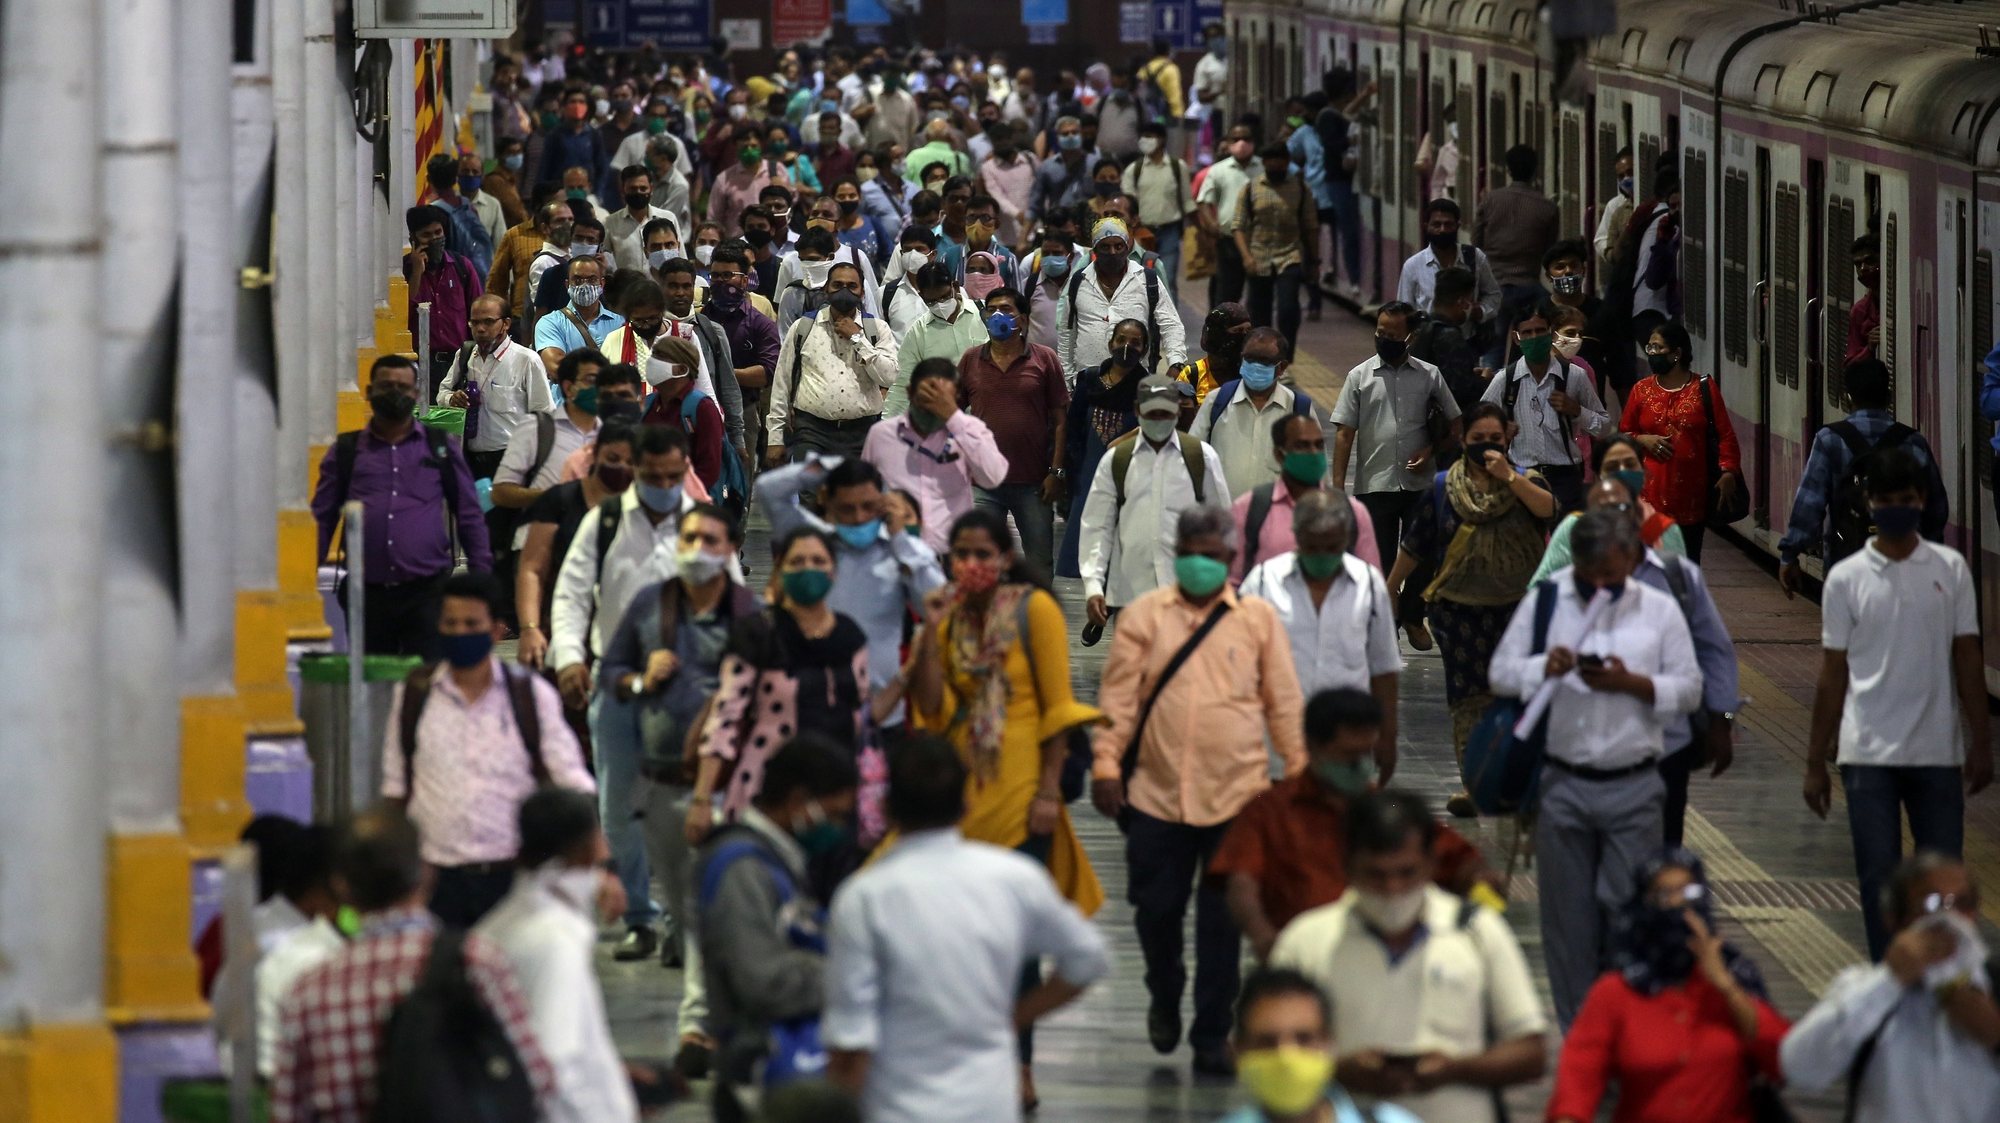 epa09108476 Indian people wearing face masks to avoid the spread of coronavirus COVID19 disease wait on the platform to board the local train at the Chhatrapati Shivaji Maharaj Terminus railway station, in Mumbai, India, 31 March 2021. Due to the massive Covid-19 spike, Maharashtra government put restrictions on public gatherings and imposed night curfew from 8pm to 7am, in which public places including parks, beaches, shopping malls, hotels, and pubs will remain shut.  EPA/DIVYAKANT SOLANKI